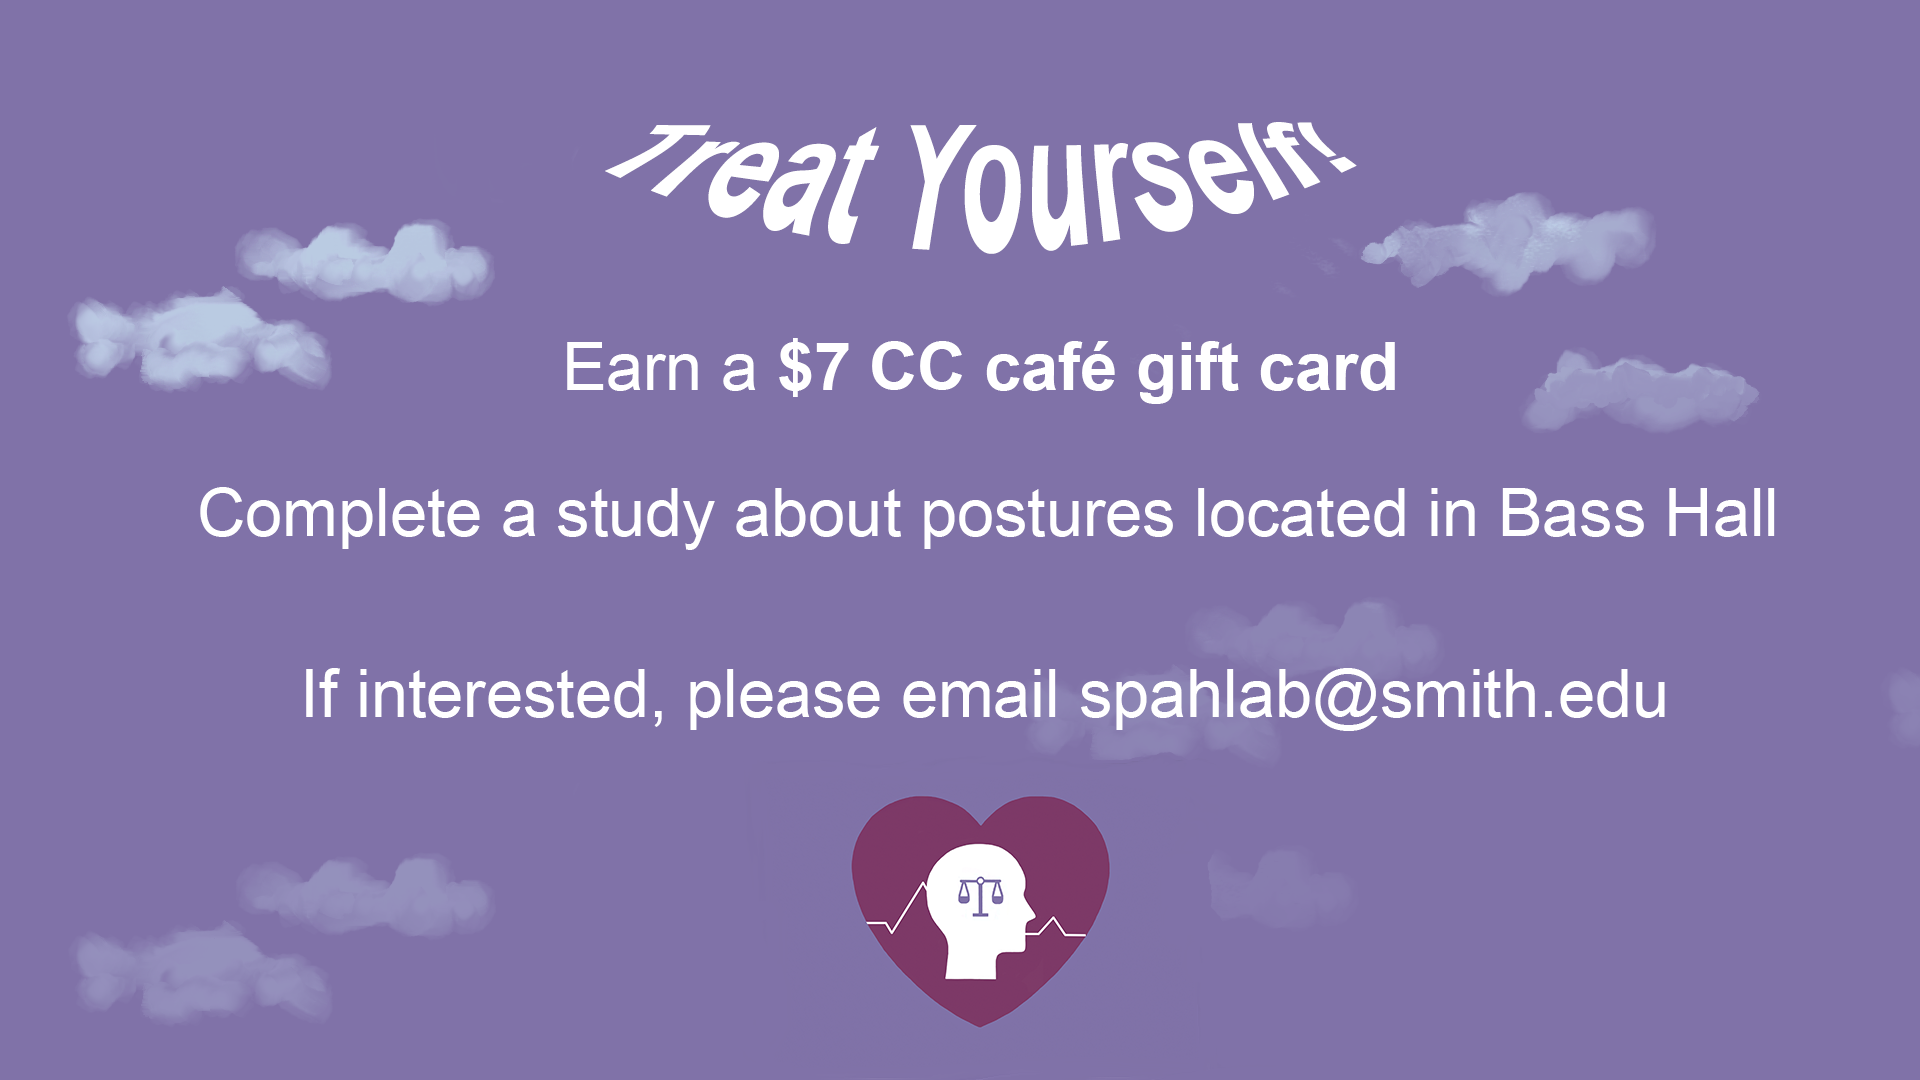 Participate in a Psychology Study & Earn Café Gift Card